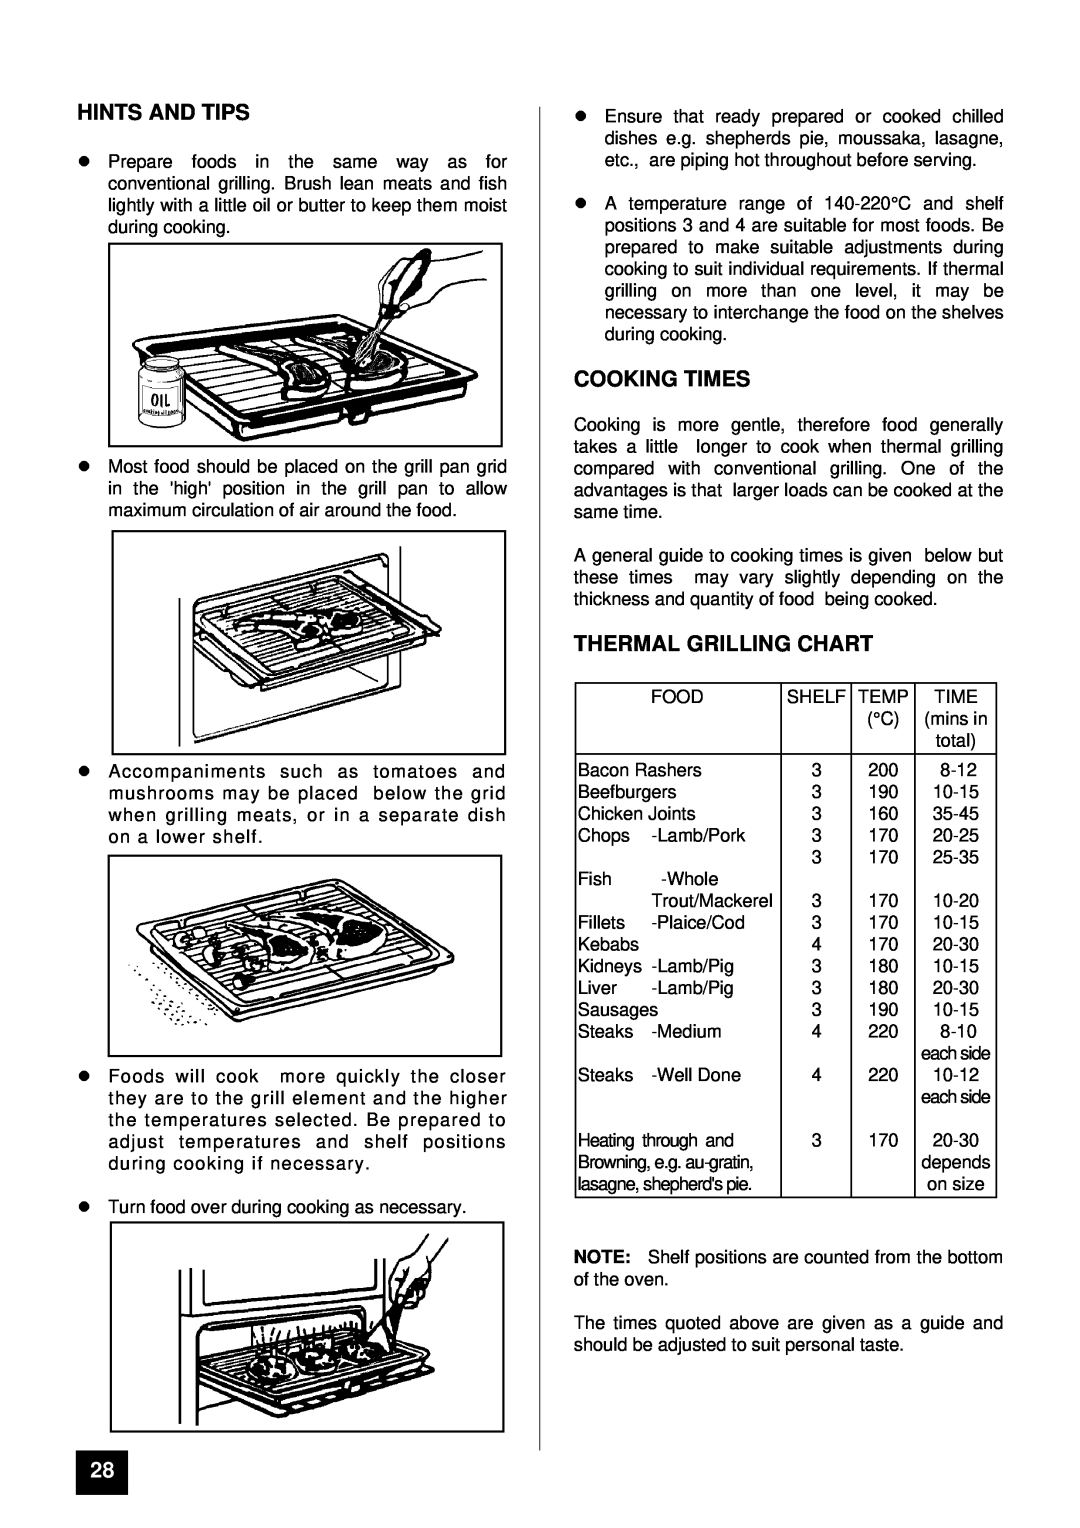 Tricity Bendix BS 615 SO installation instructions Cooking Times, Thermal Grilling Chart, lHINTS AND TIPS 